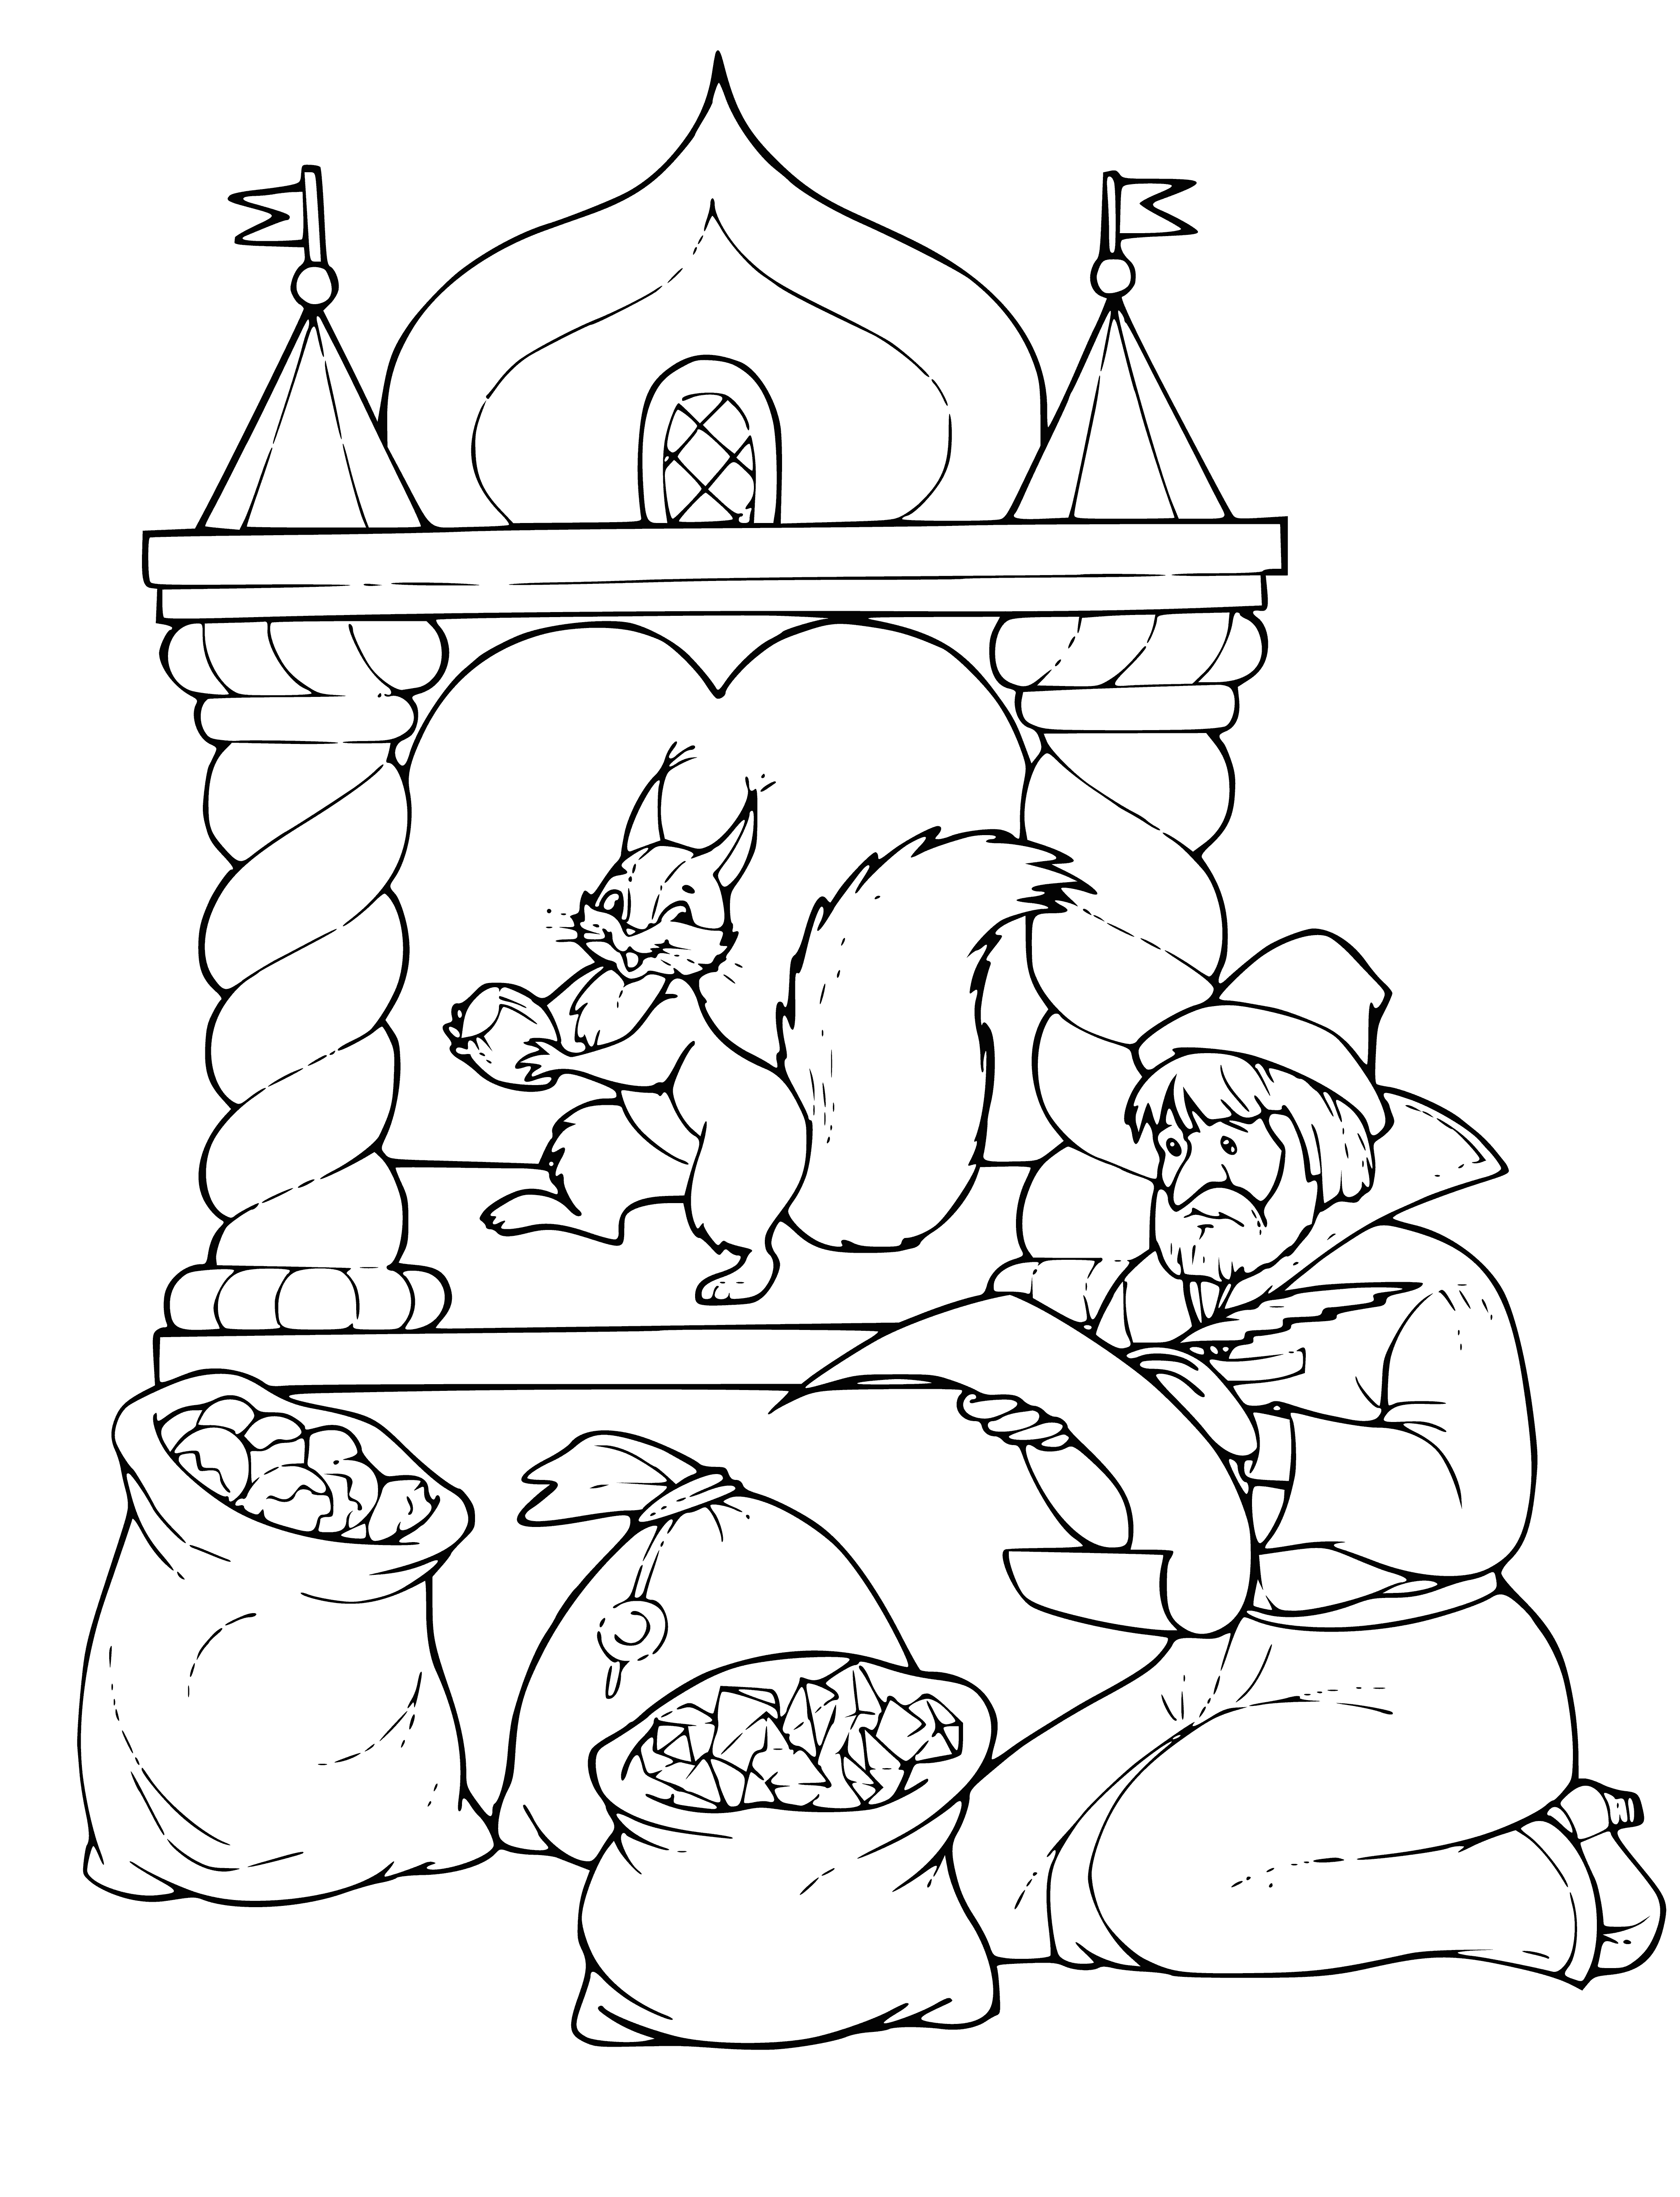 Squirrel in the crystal house coloring page